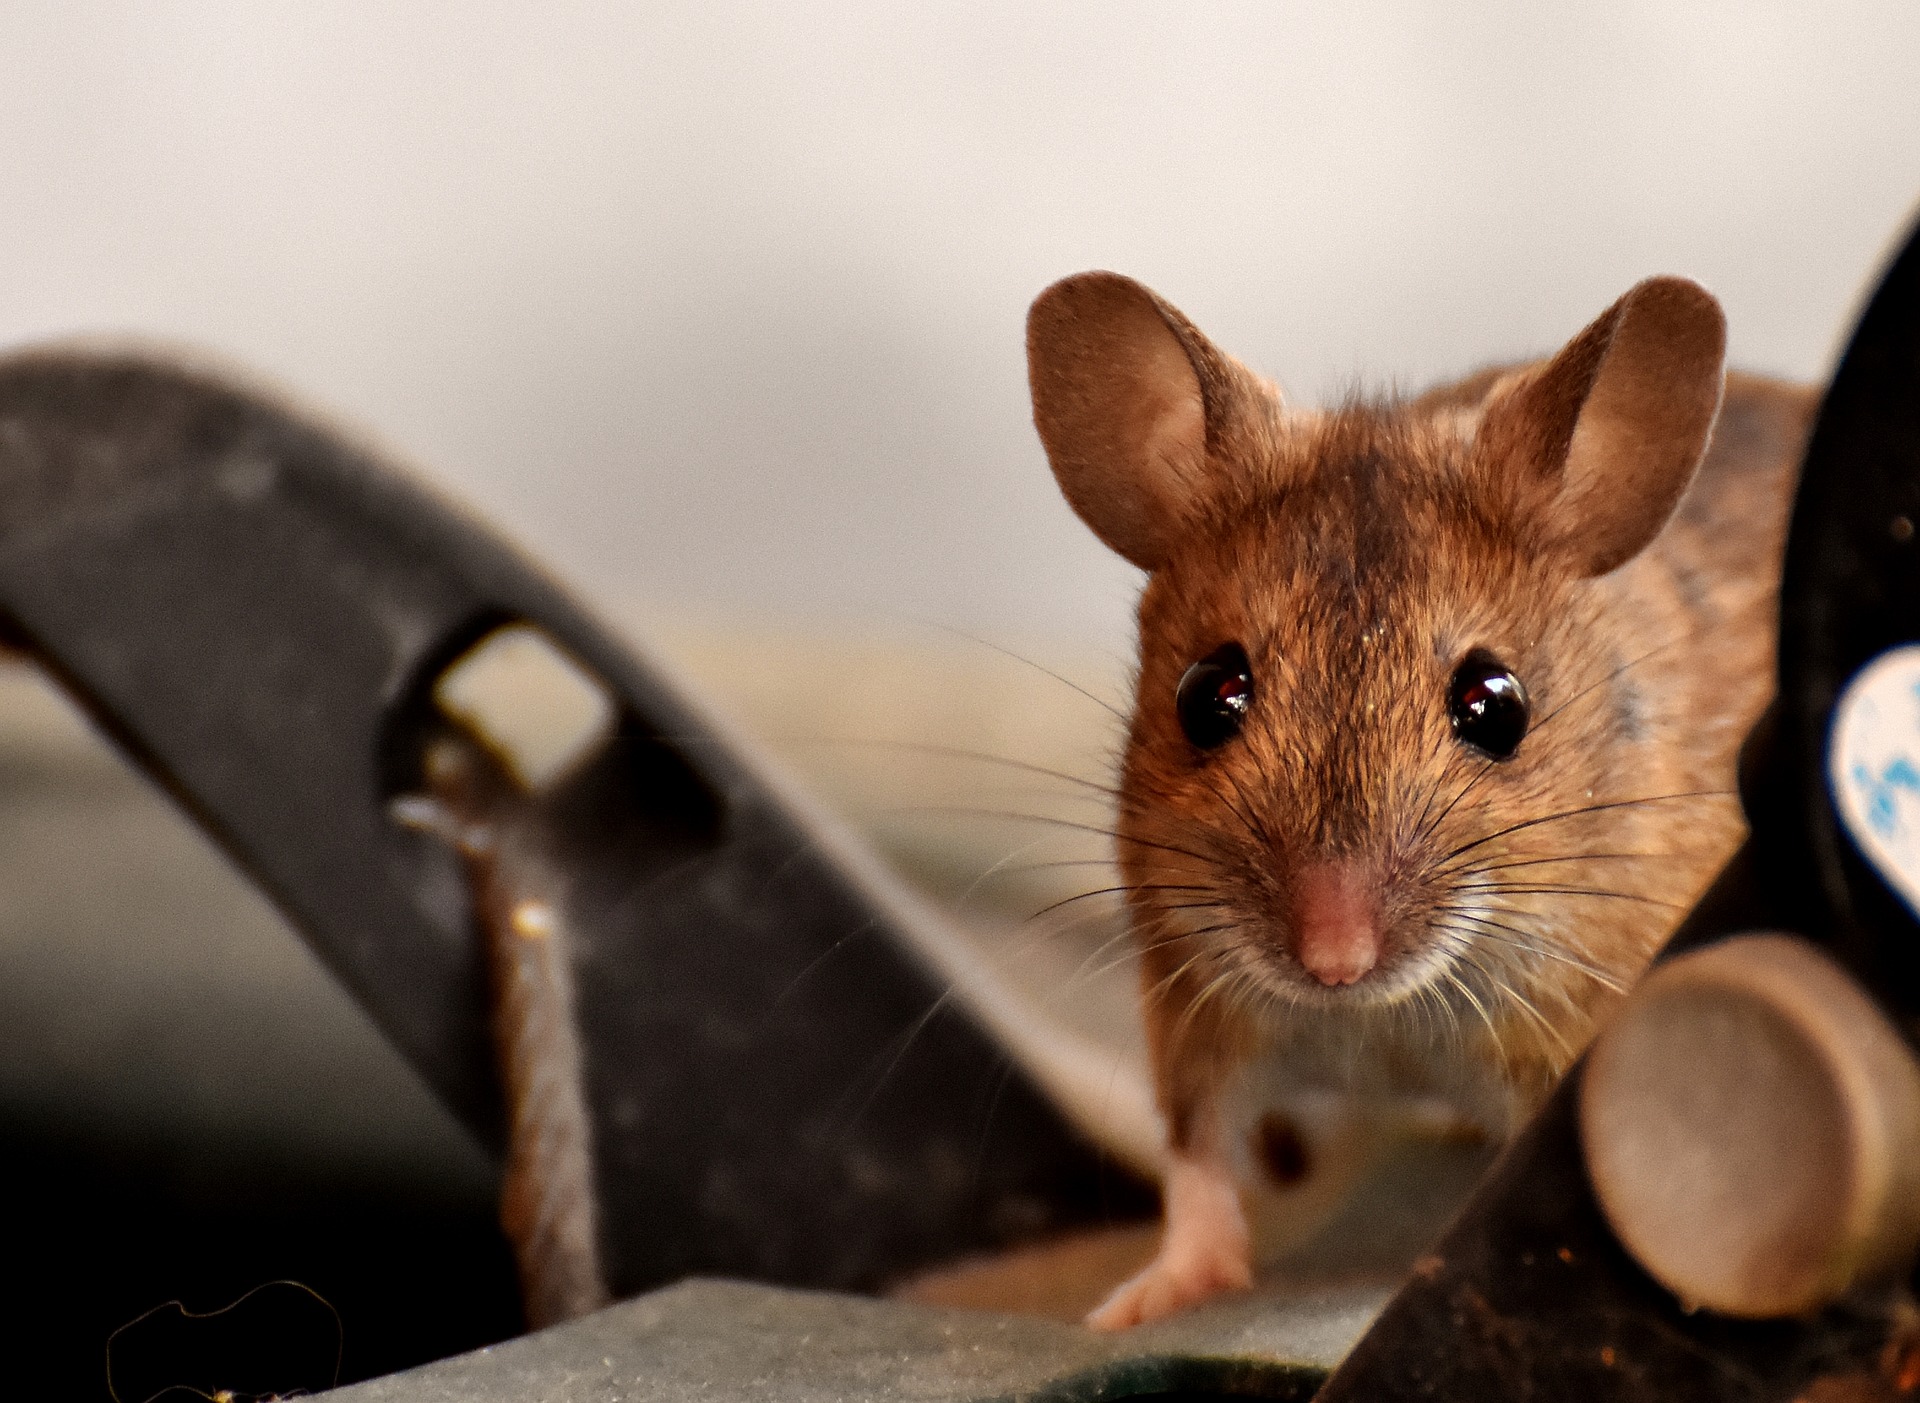 The 13 Best Ways to Help Get Rid of Mice